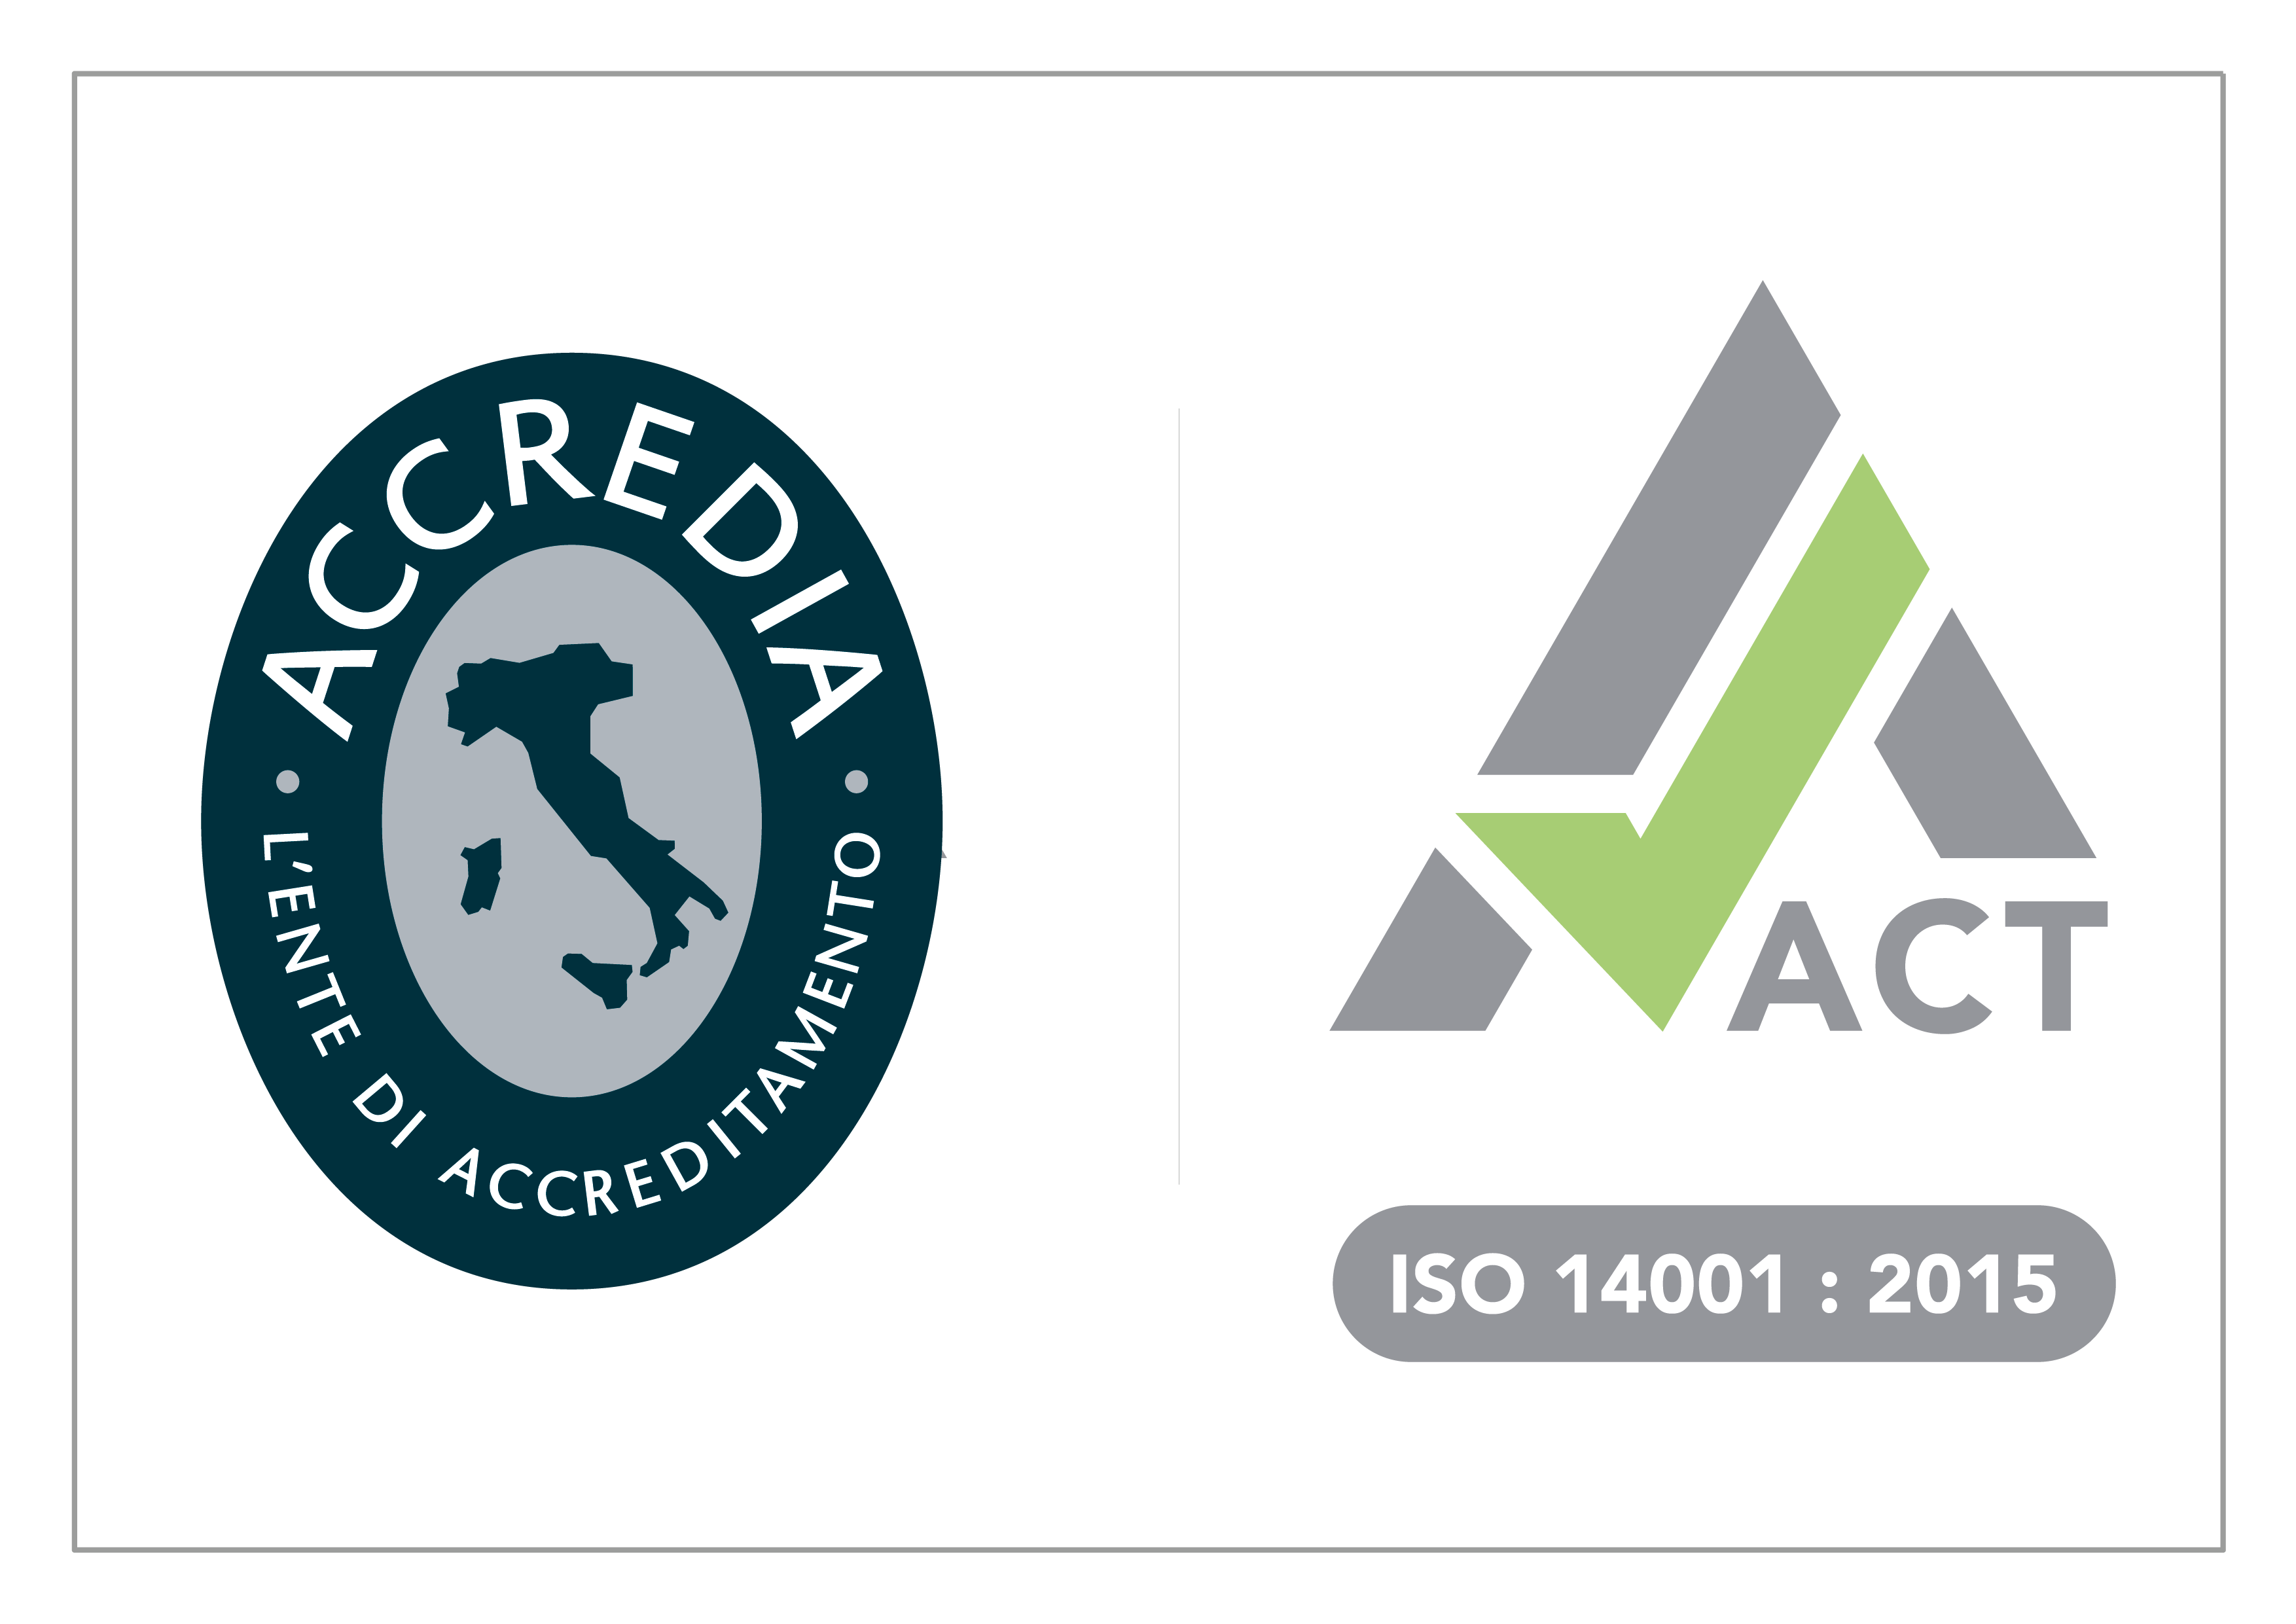 Iso 14001-2015